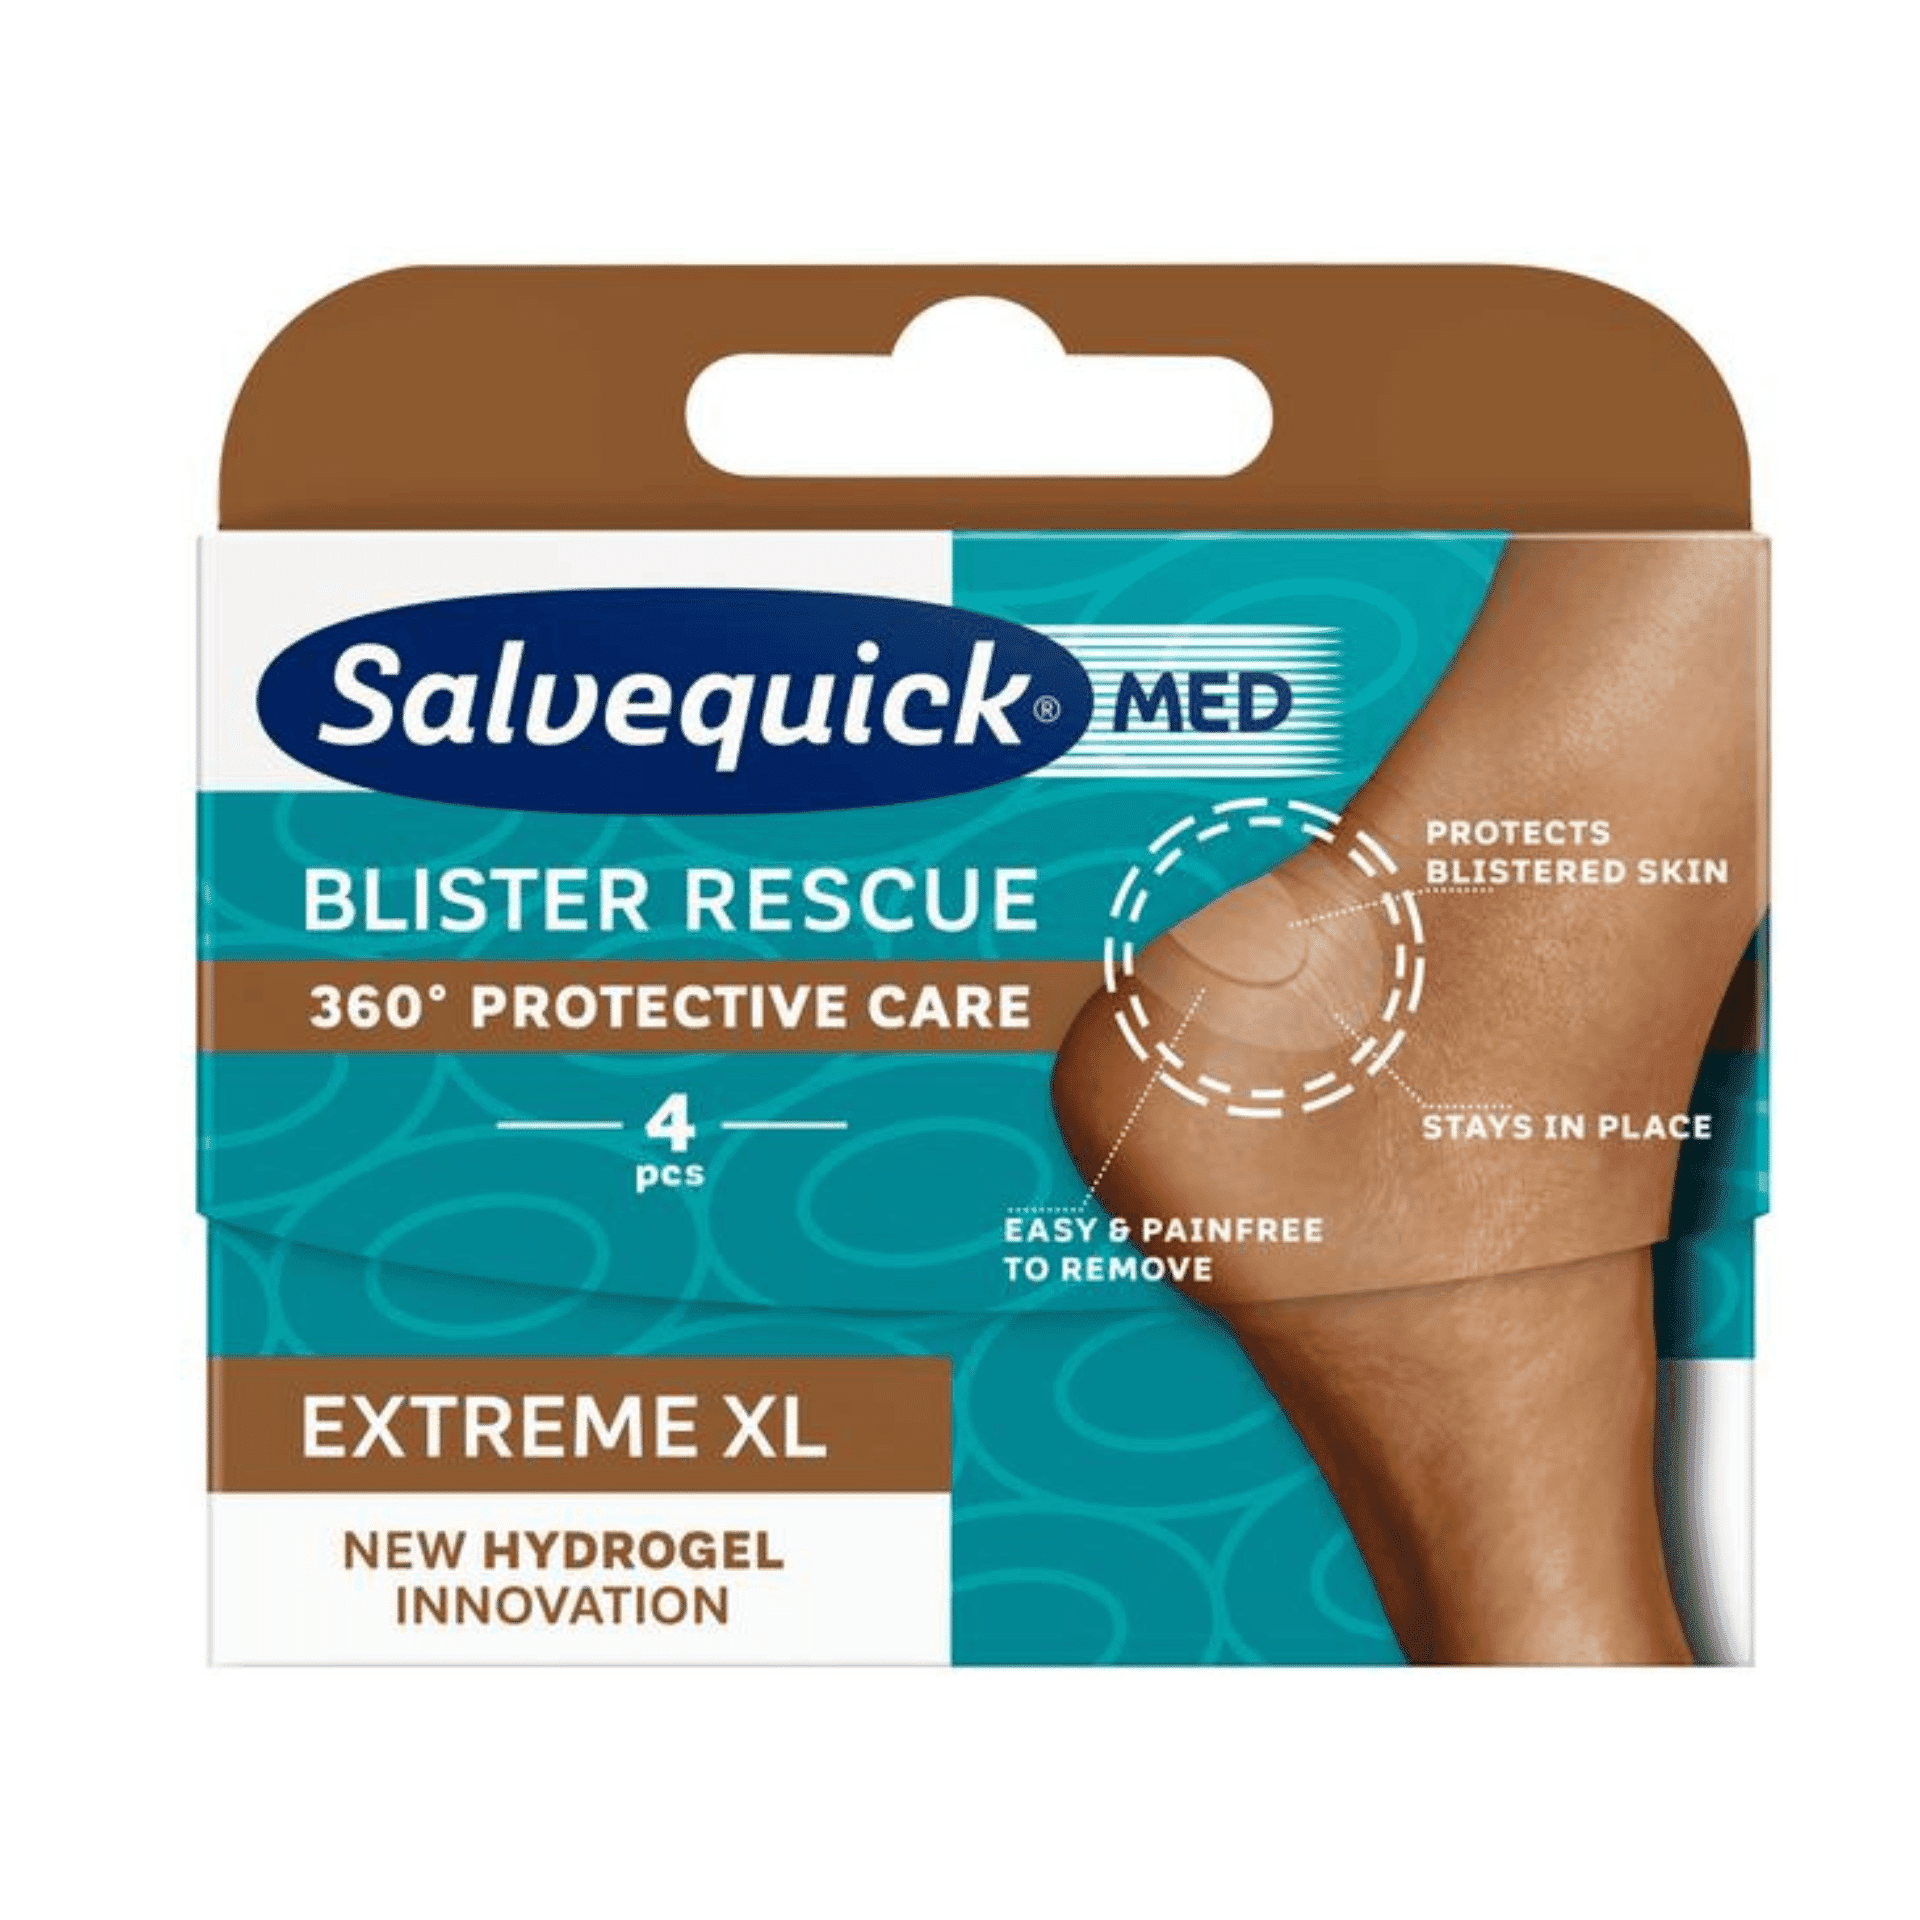 Salvequick Med Blister Rescue Extreme XL